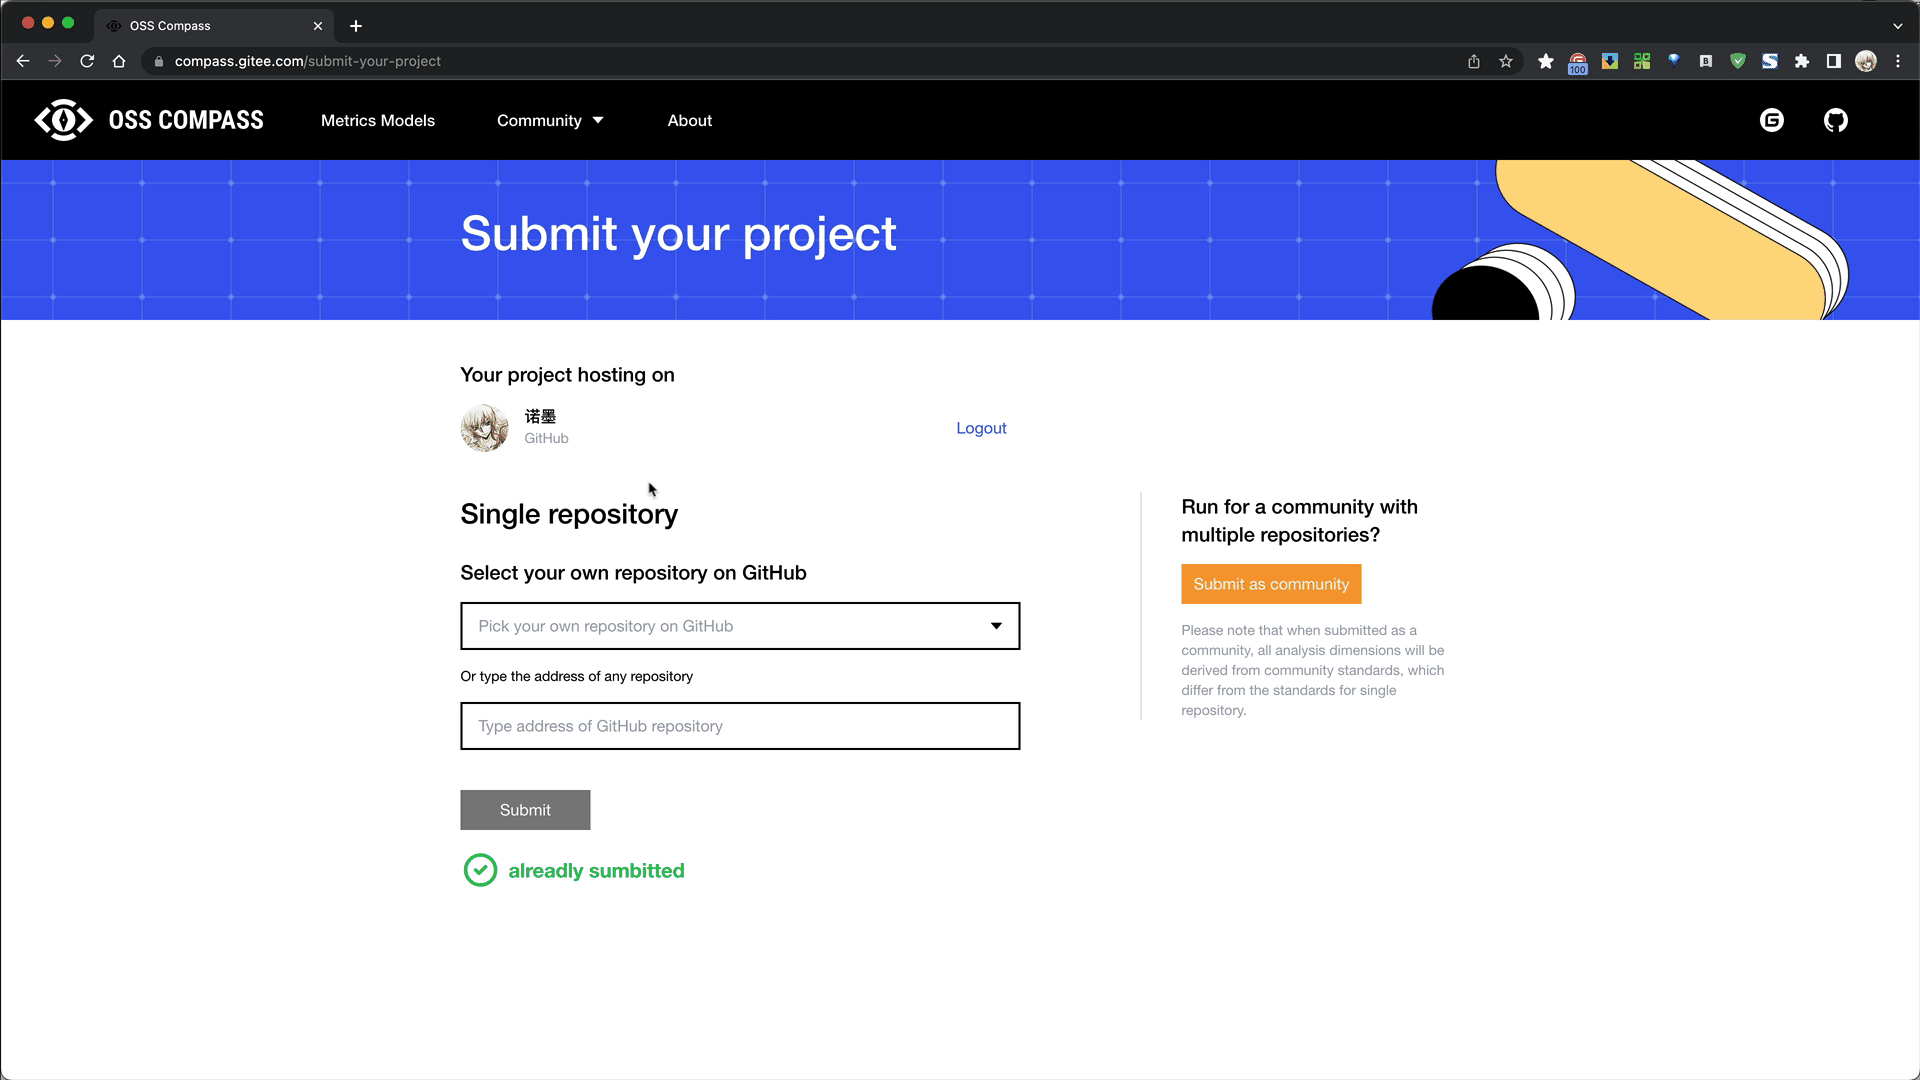 Submit as Community